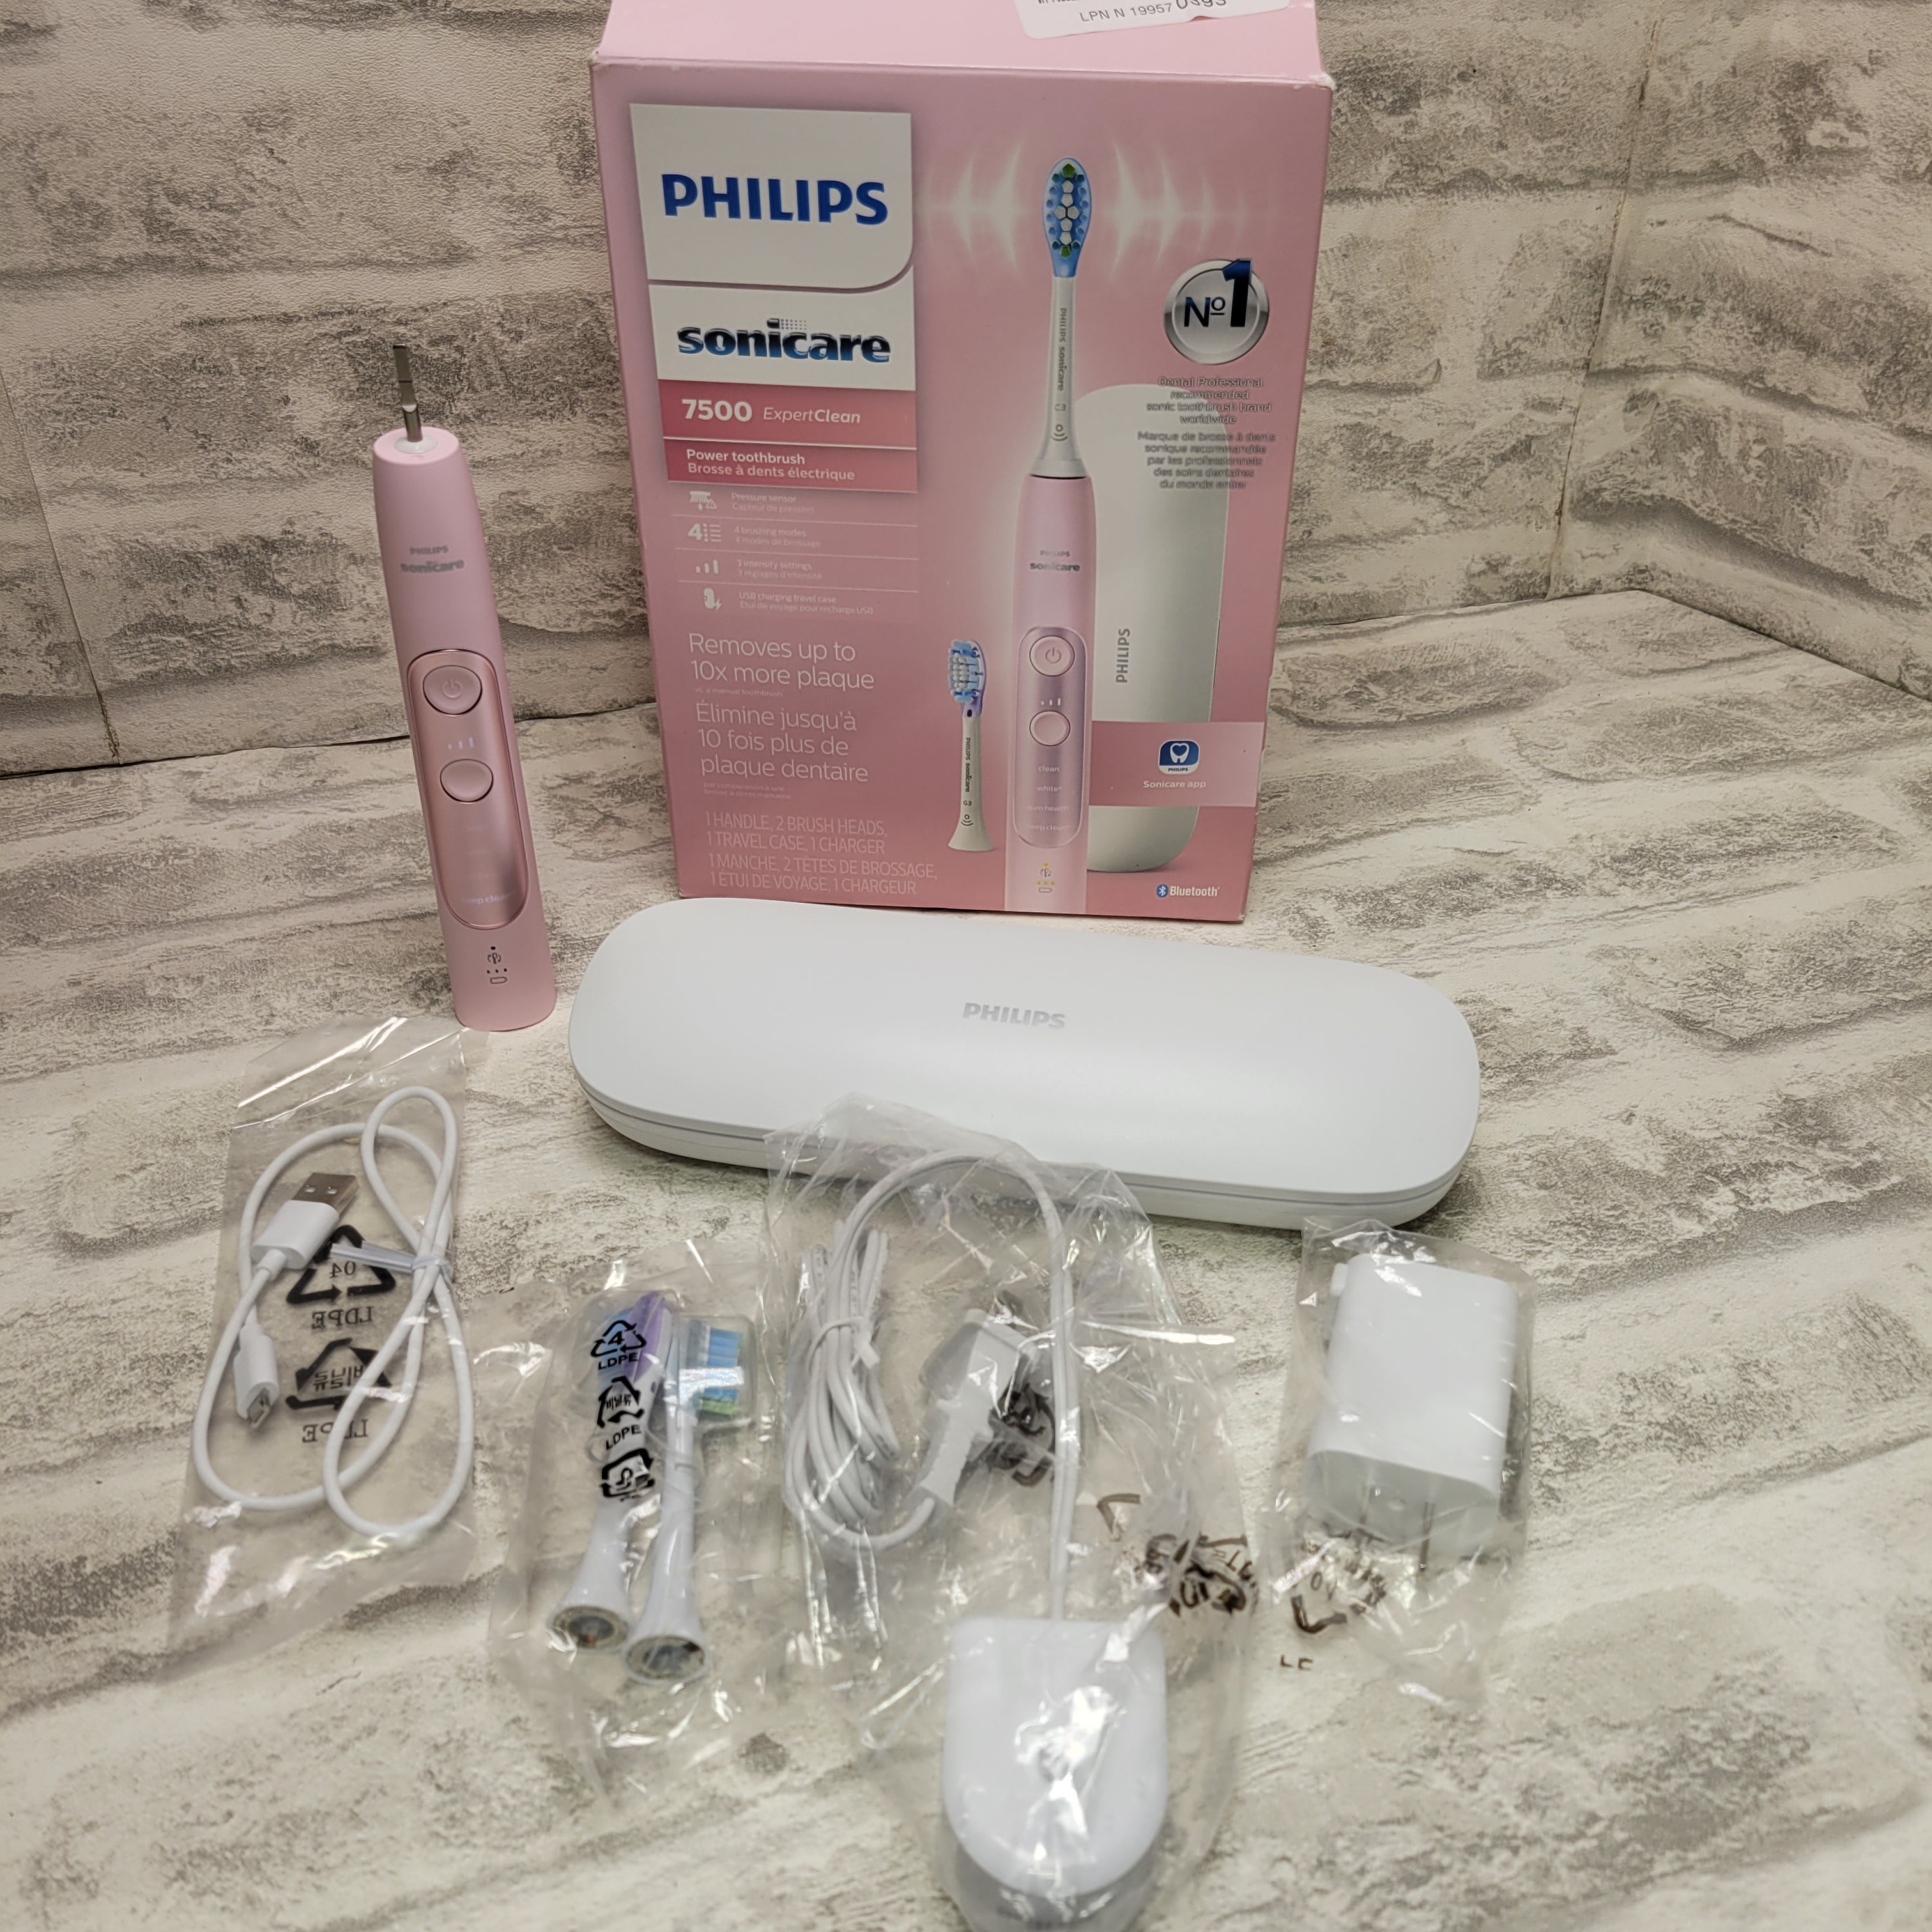 Philips Sonicare ExpertClean 7500, Electric Power Toothbrush, Pink, HX9690/07 (7765463531758)